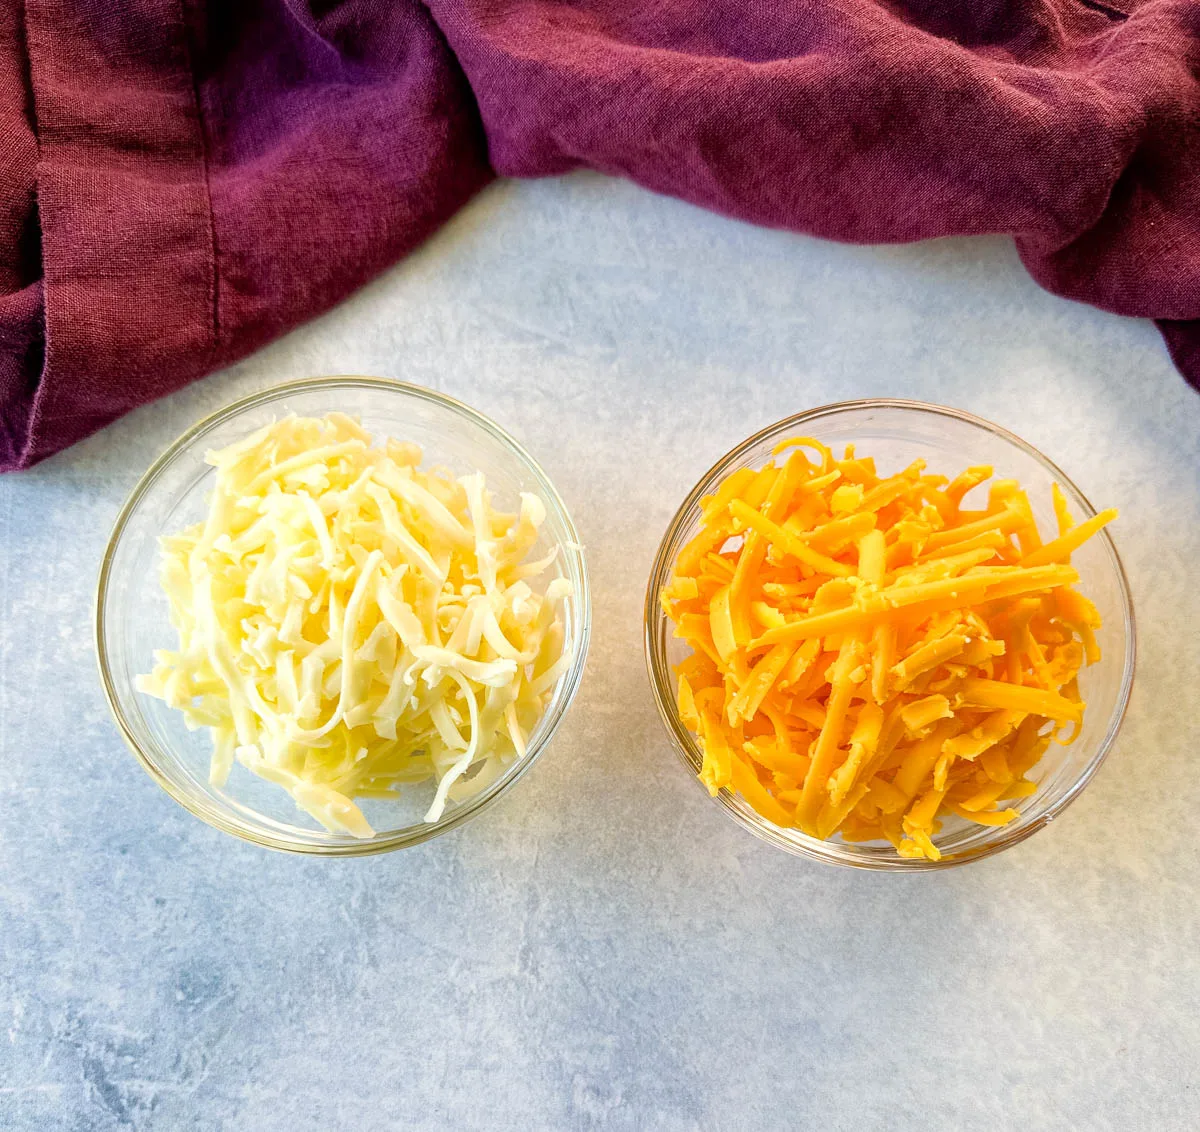 grated cheddar and Monterrey jack cheese in separate glass bowls